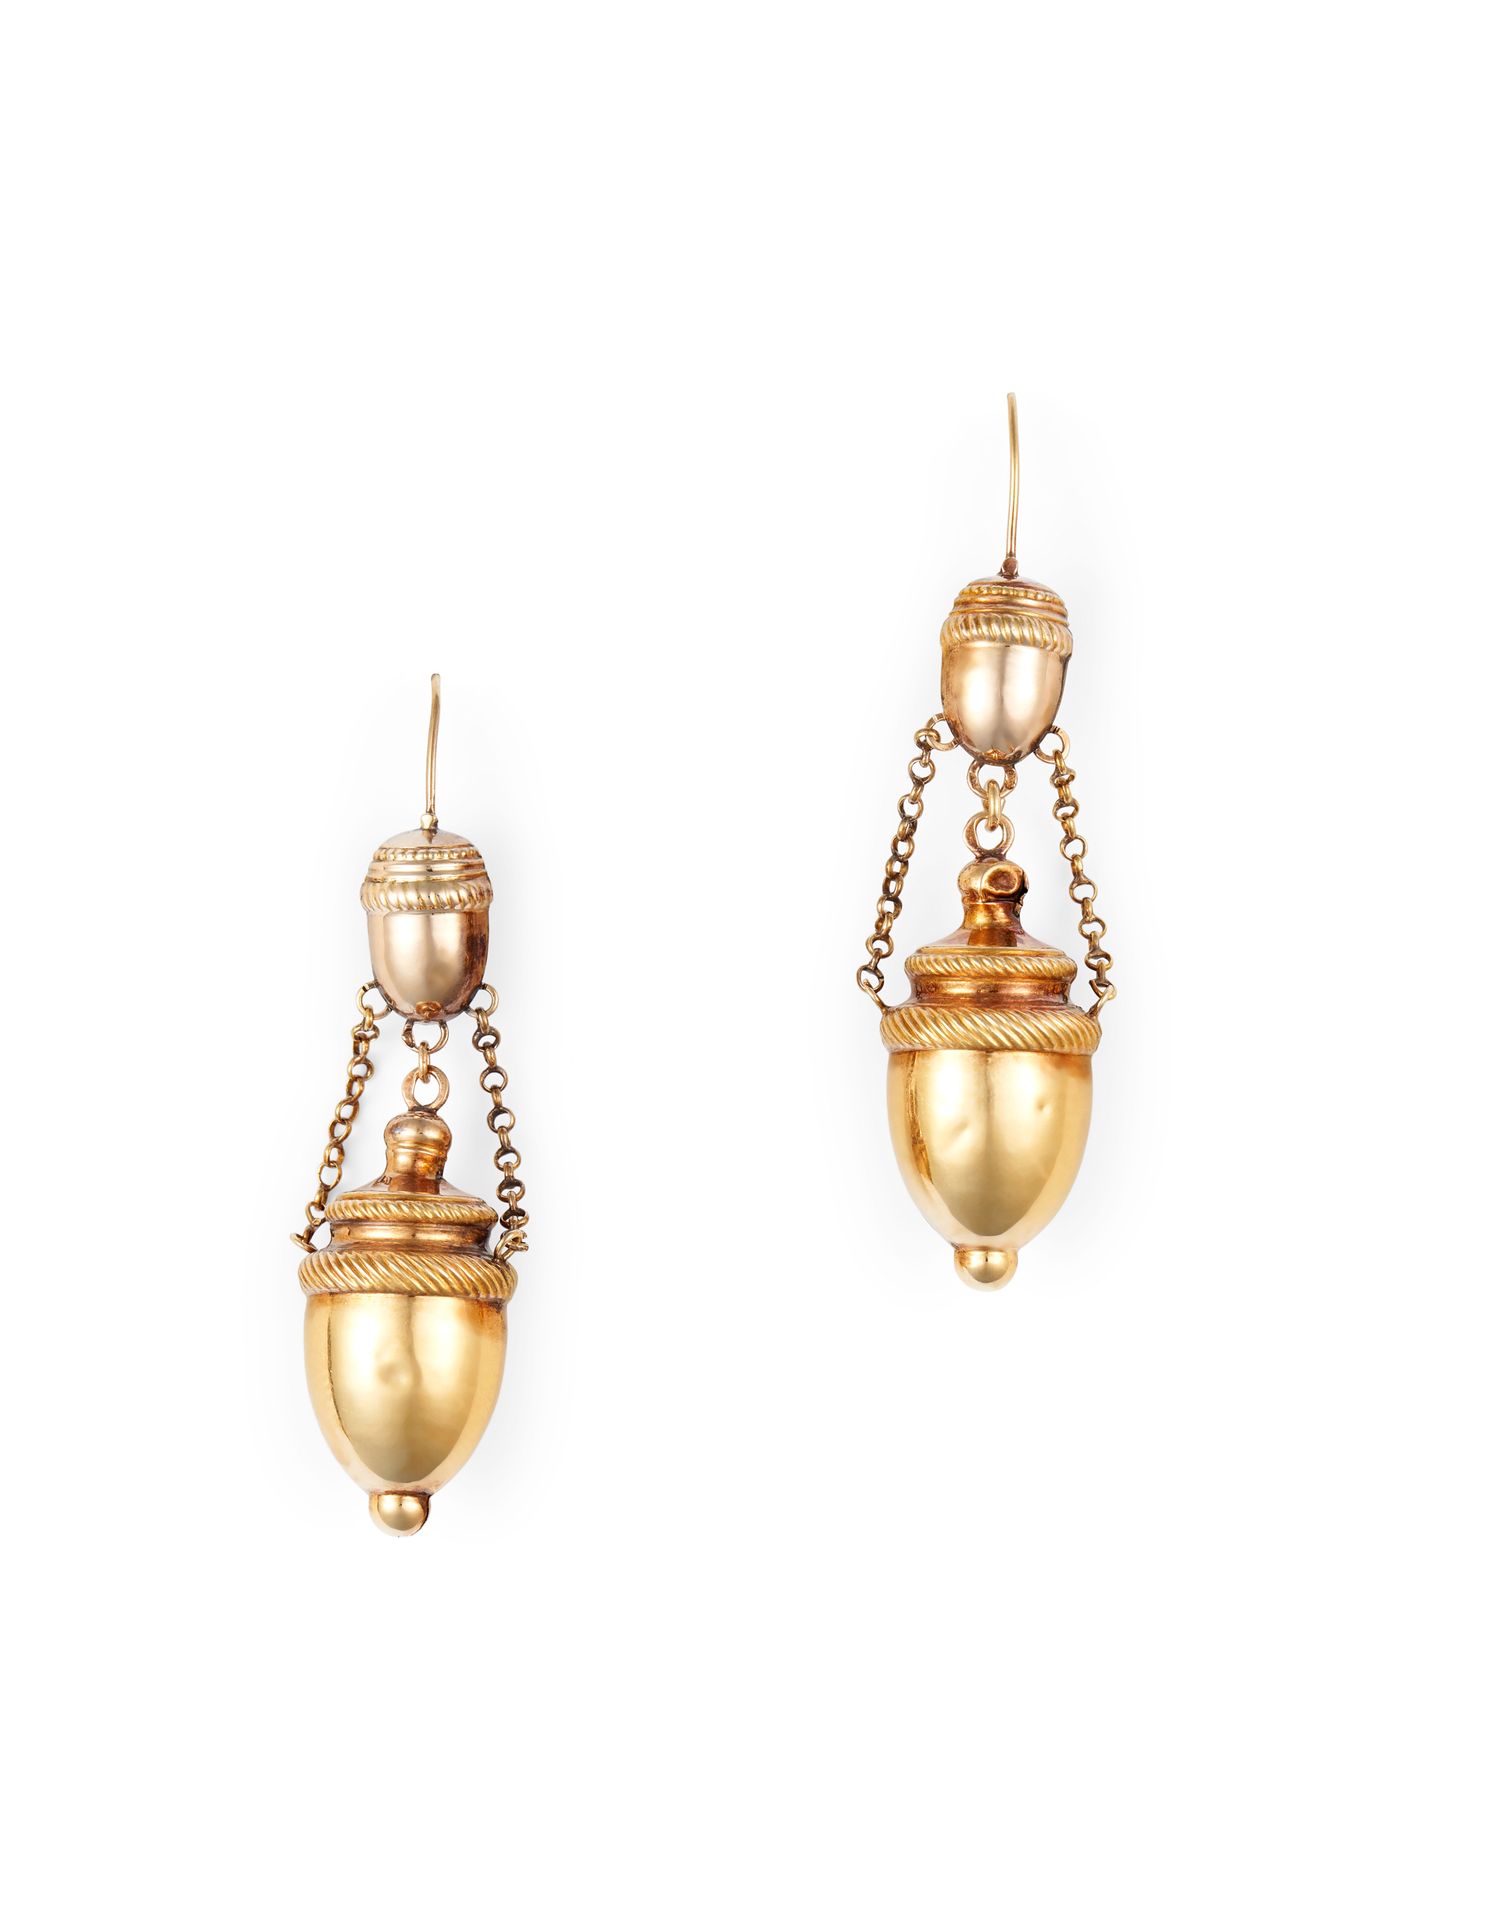 Null AMPHORA EARRINGS In 18K yellow gold, depicting and amphora linked by 2 chai&hellip;